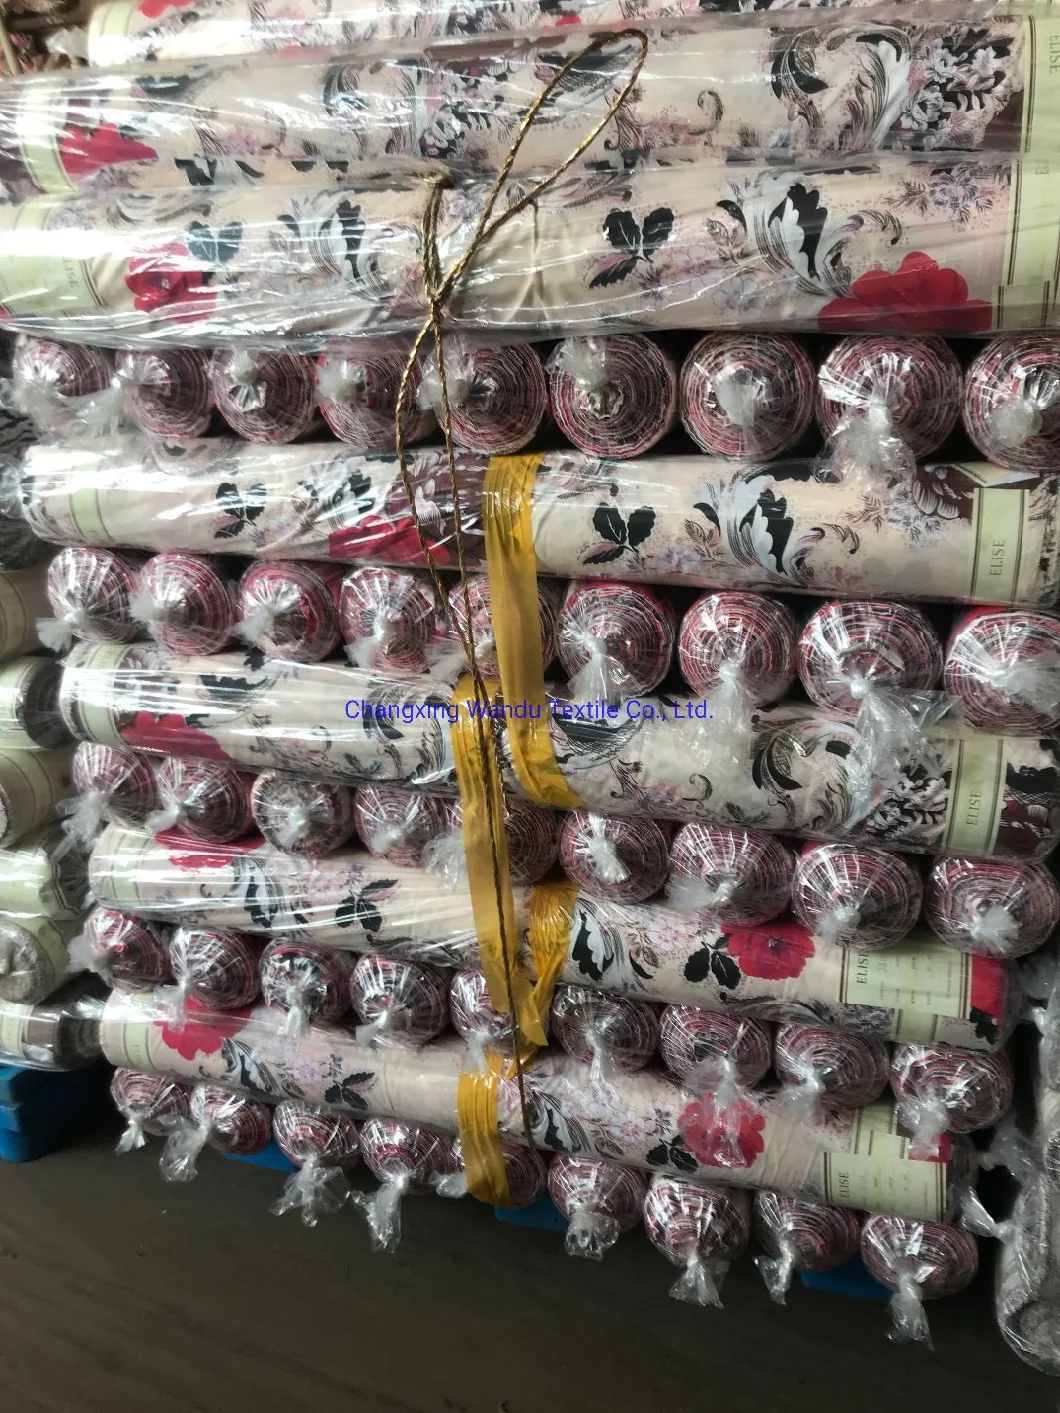 Changxing Wandu Textile Wholesales of Bedsheet and Cloths, The Latest Orders for Printed Fabrics in June Polyester Microfiber Fabric Textile Export